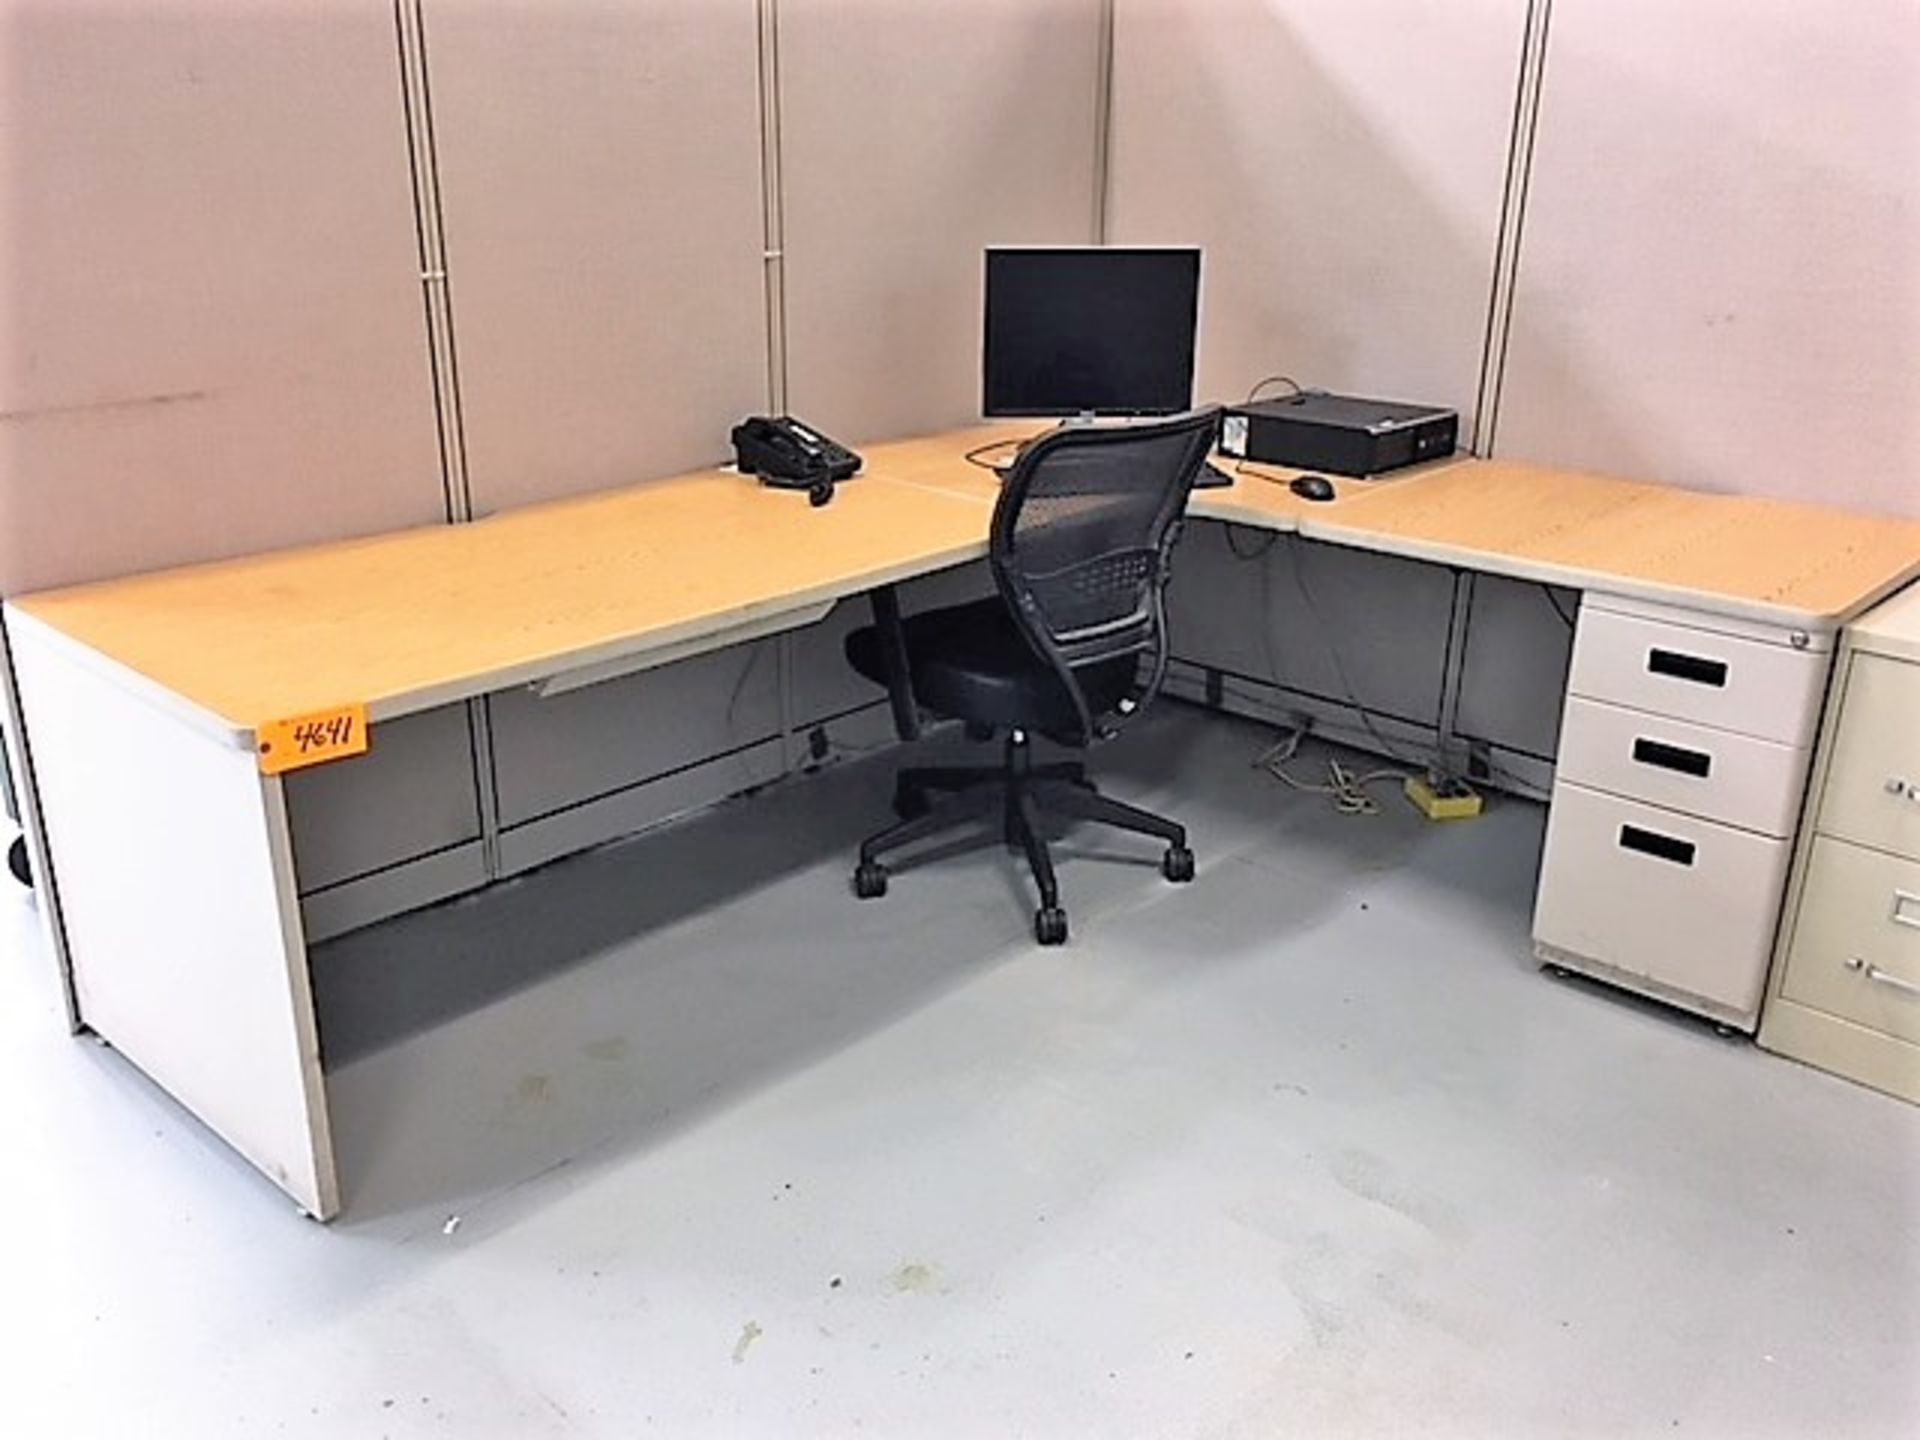 (2) MODULAR DESKS, (1) ROUND TABLE & (1) LATERAL FILE CABINET (CONTENTS - MAZAK BOOKS ARE NOT